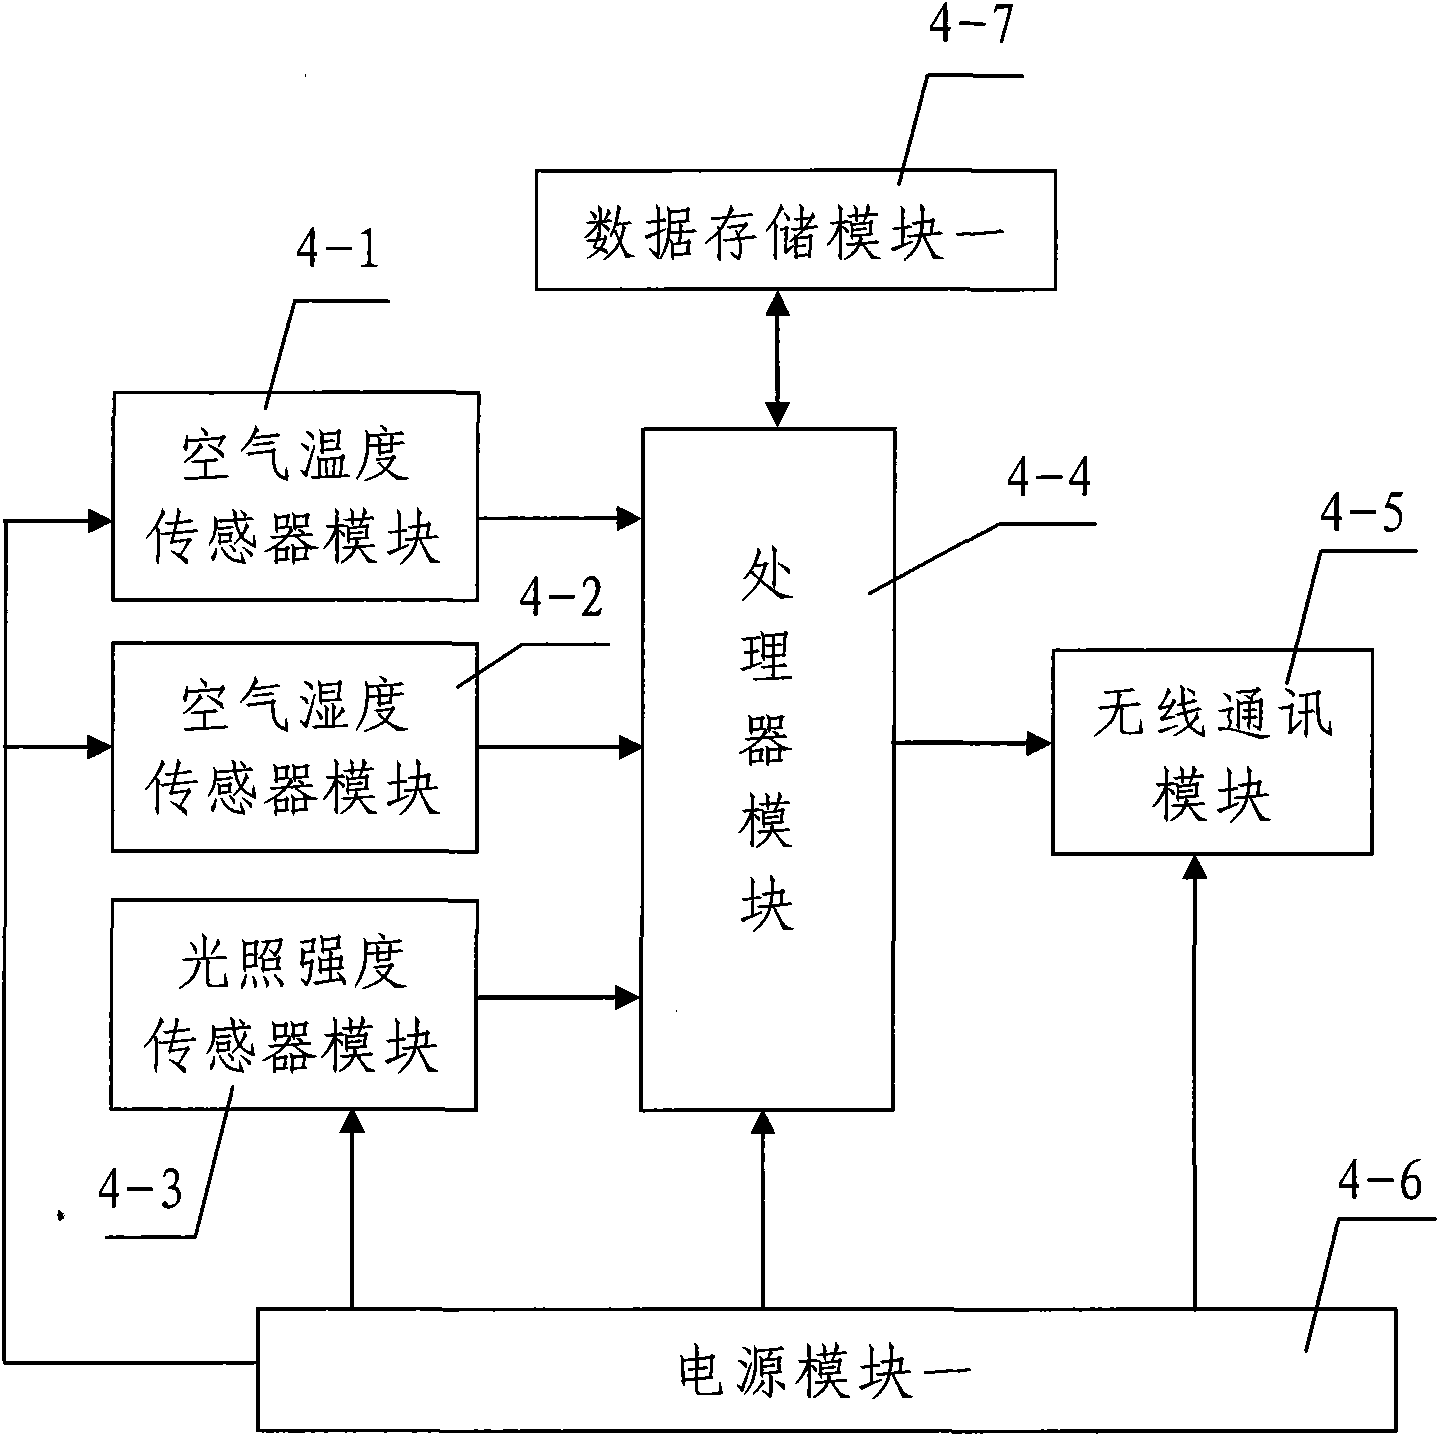 Orchard planting monitoring system based on wireless sensor networks and monitoring method thereof